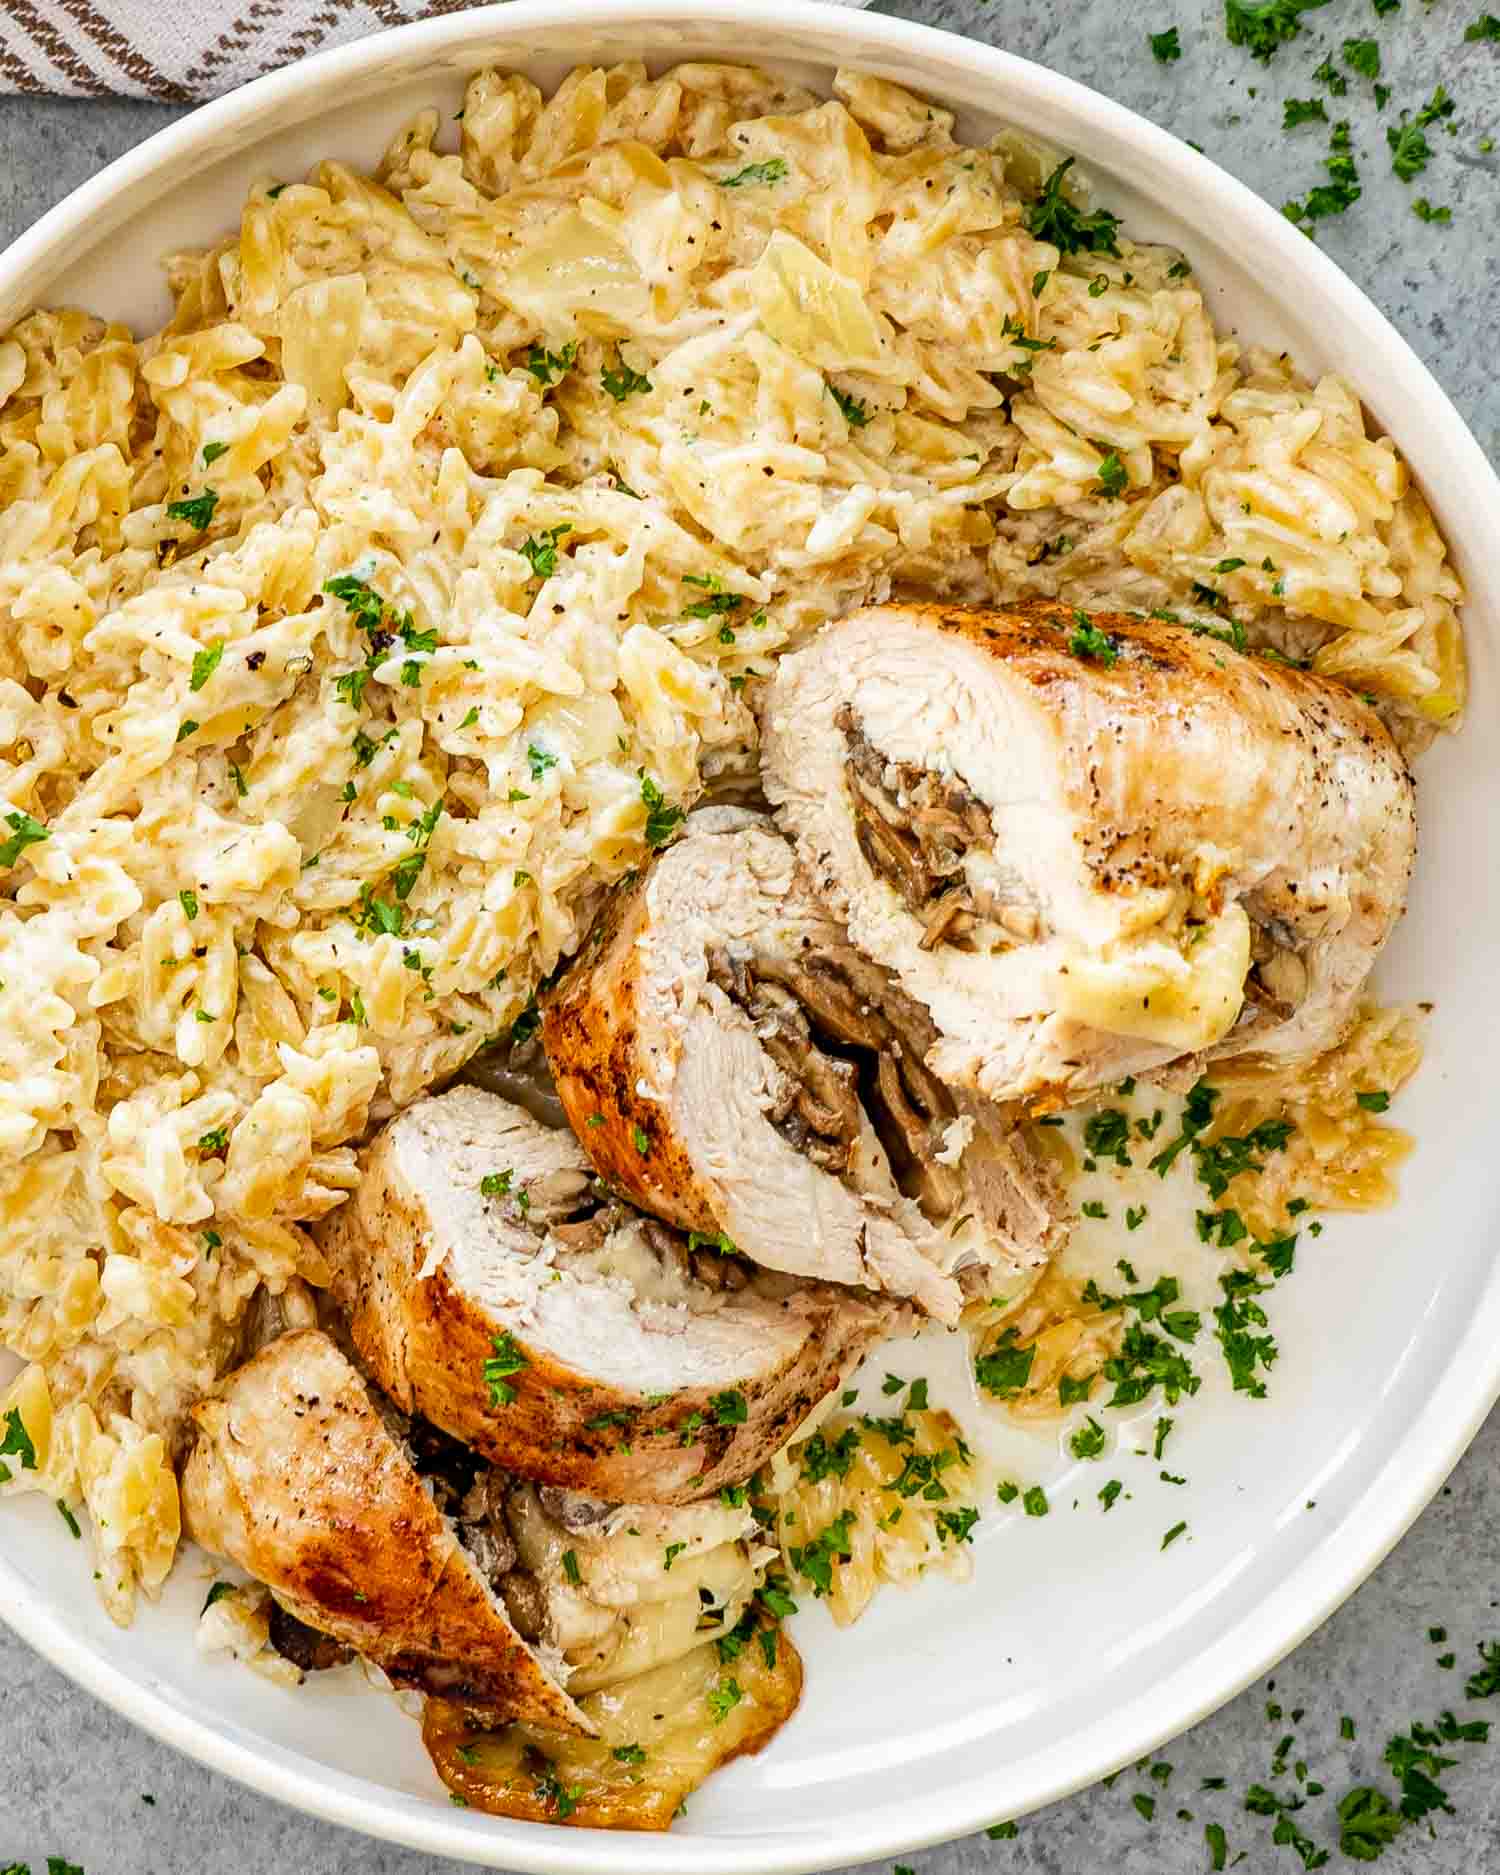 a mushroom stuffed chicken breast along some parmesan orzo in a white bowl.